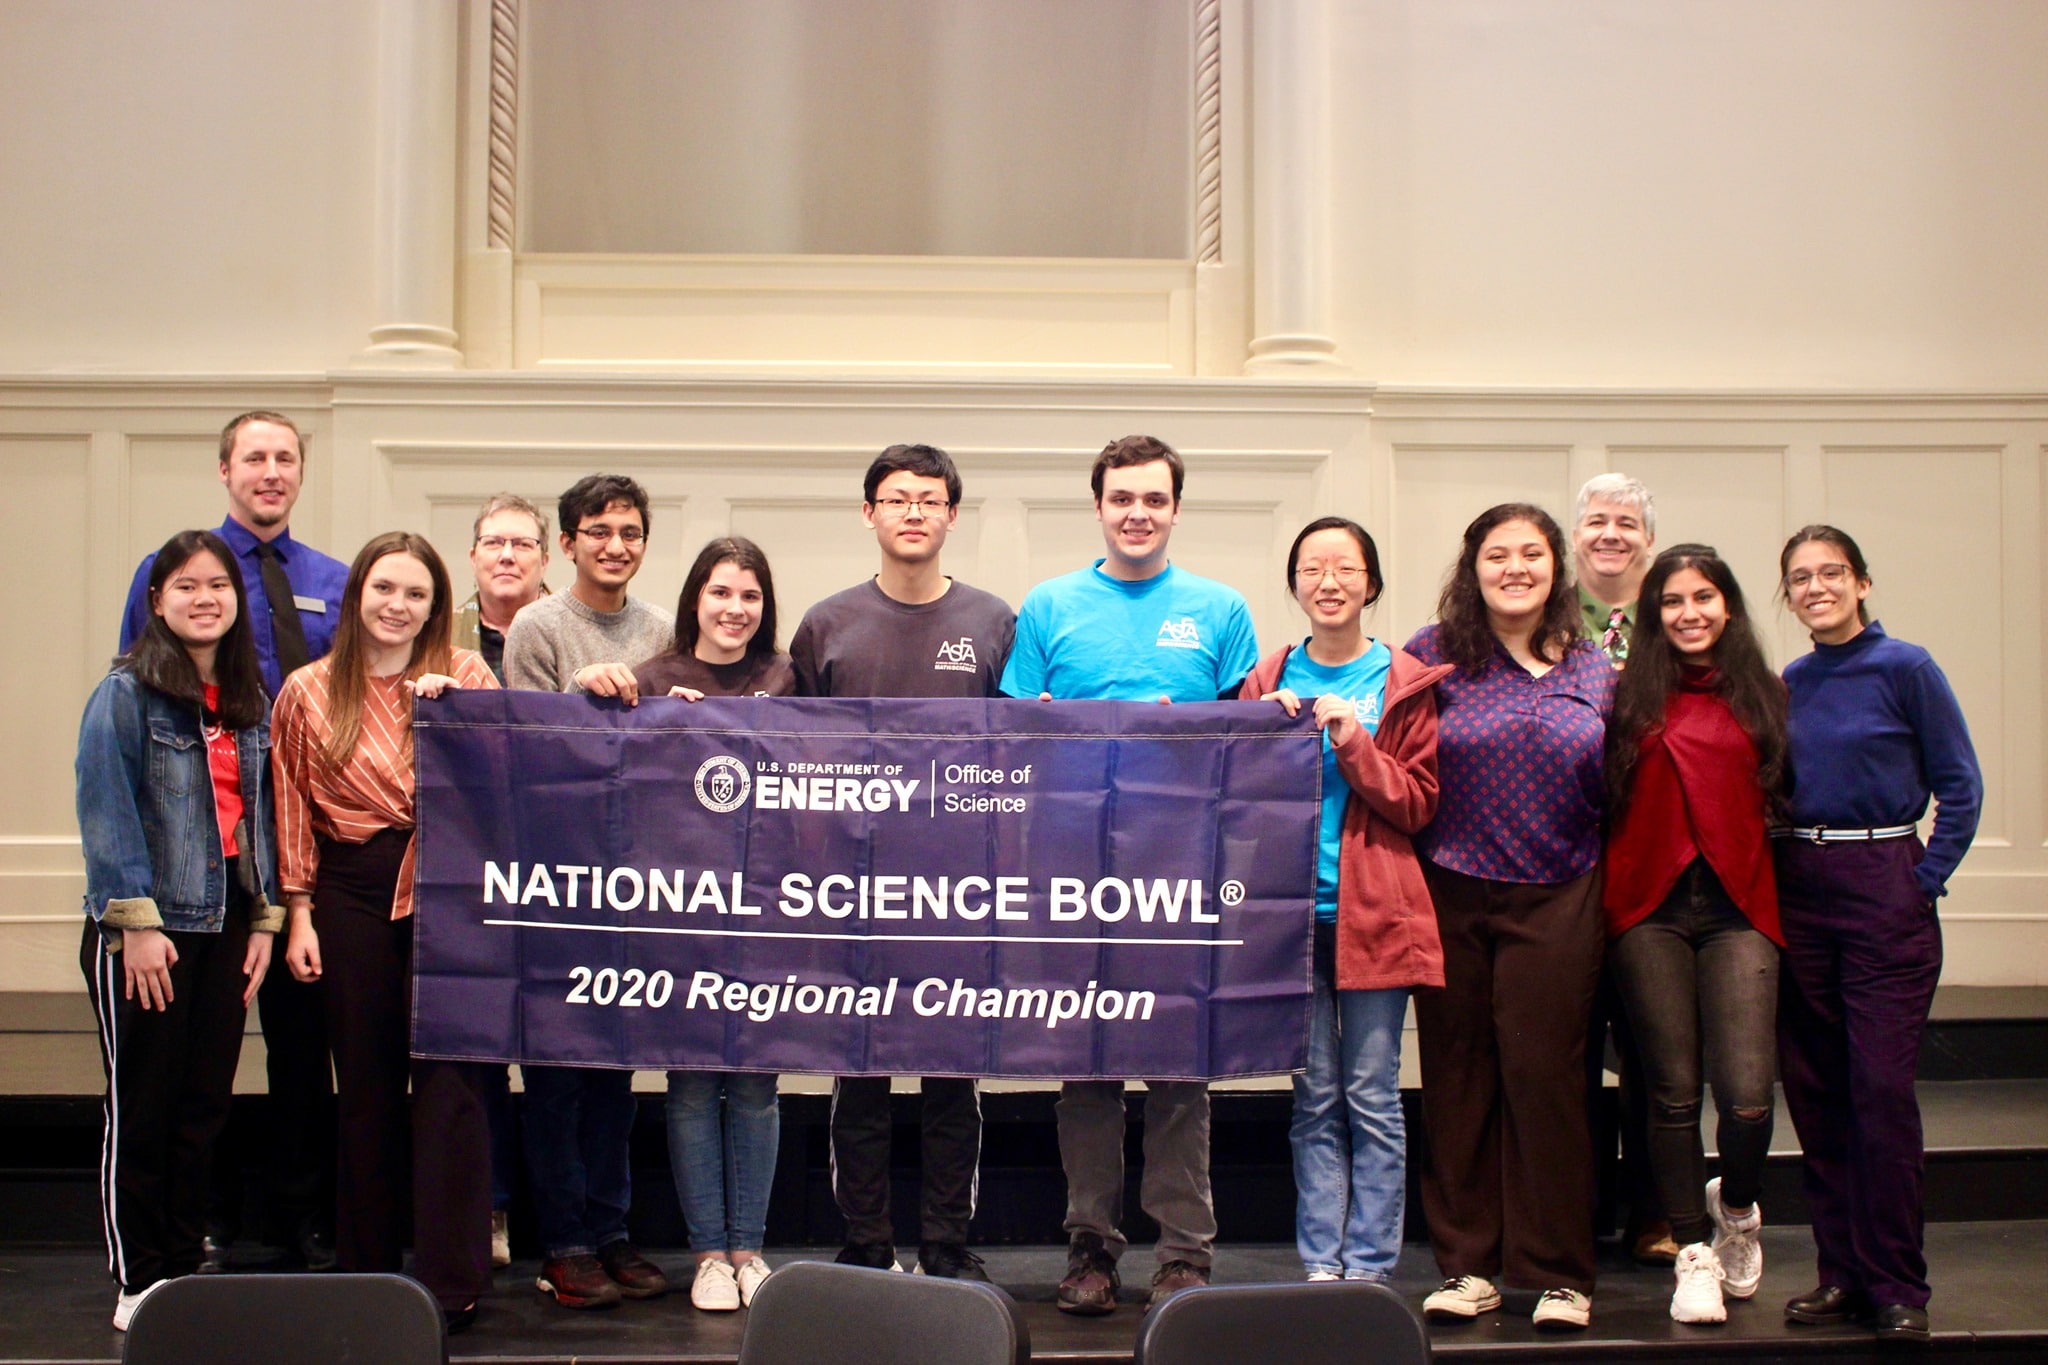 ASFA Regional Champion Winning team from Alabama School of Fine Arts to compete in elite National Science Bowl